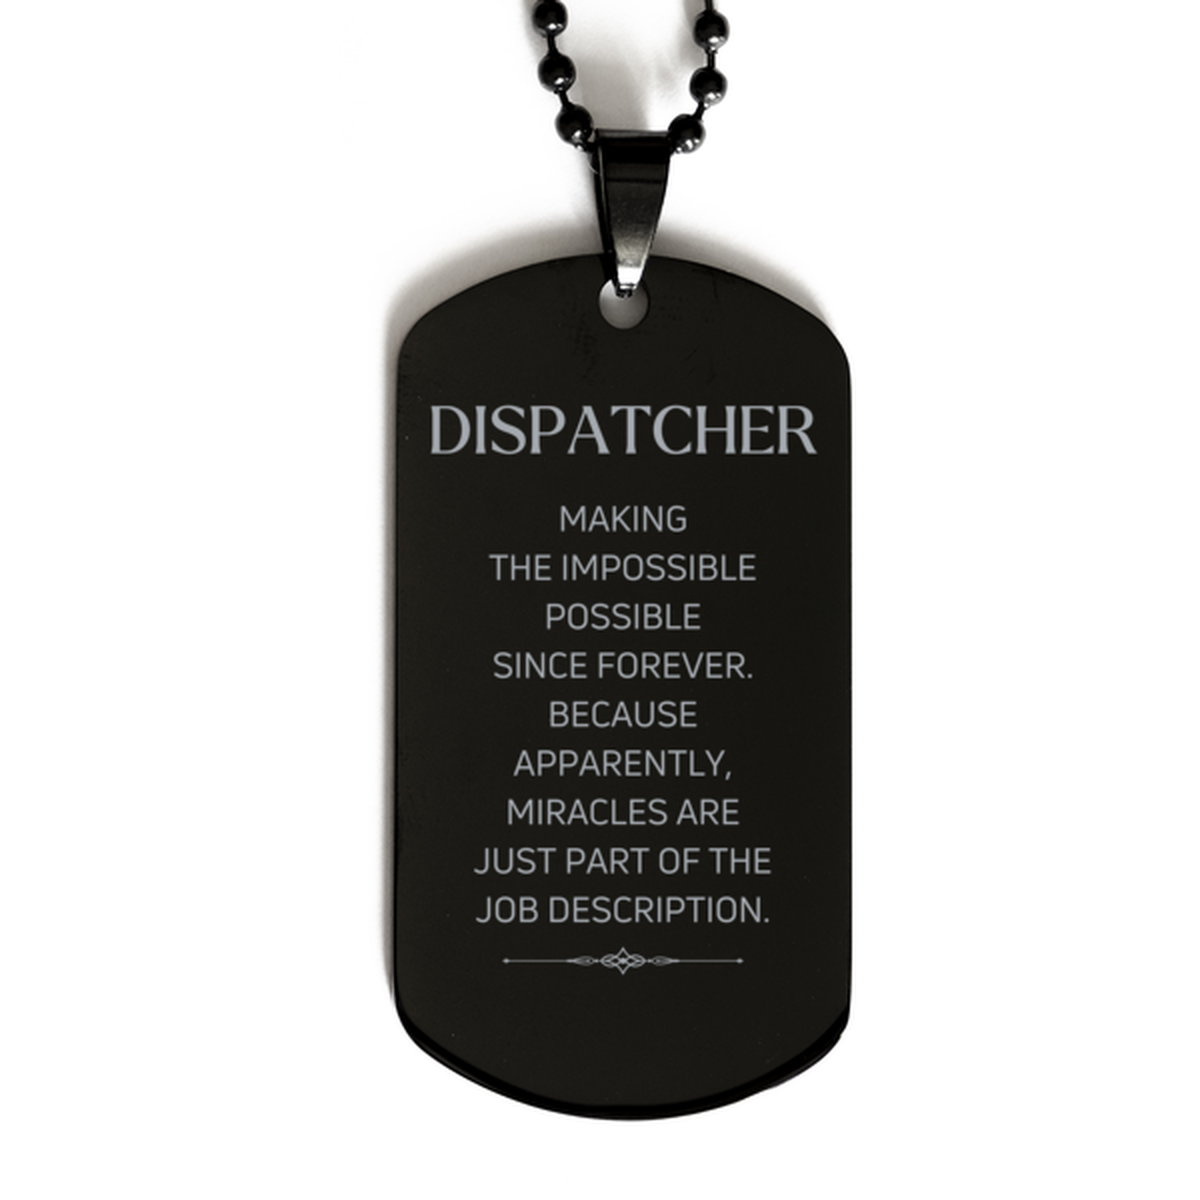 Funny Dispatcher Gifts, Miracles are just part of the job description, Inspirational Birthday Black Dog Tag For Dispatcher, Men, Women, Coworkers, Friends, Boss